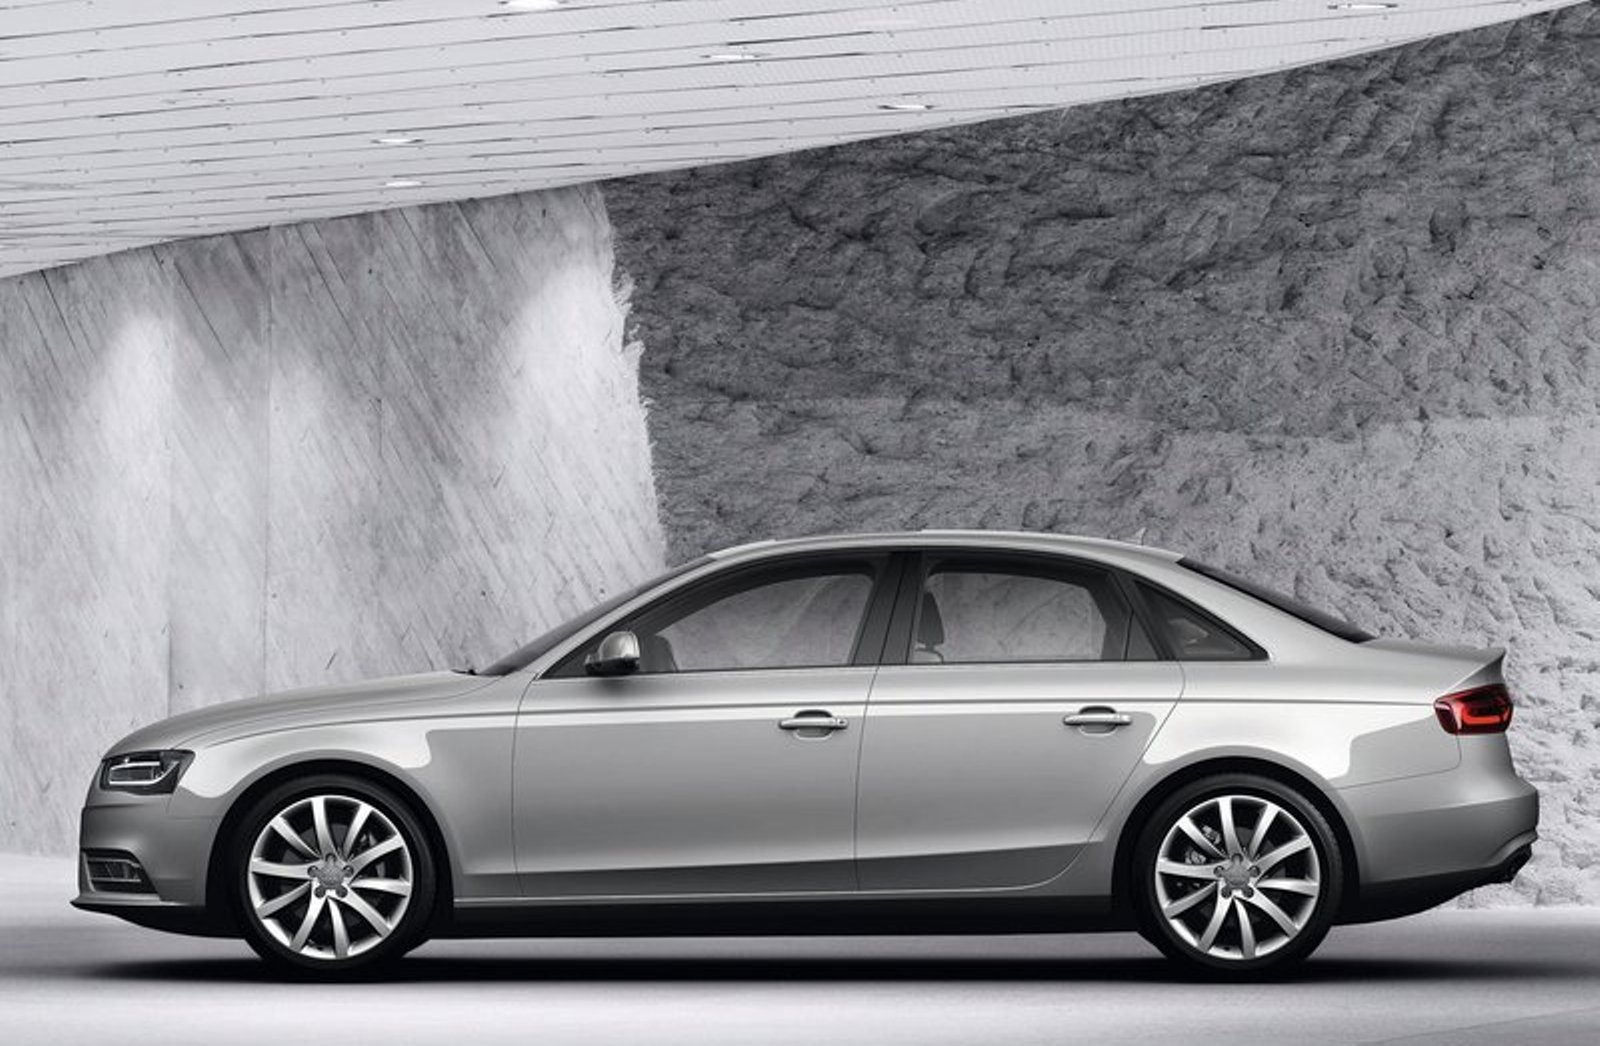 2013 Audi A4 Review and Pictures